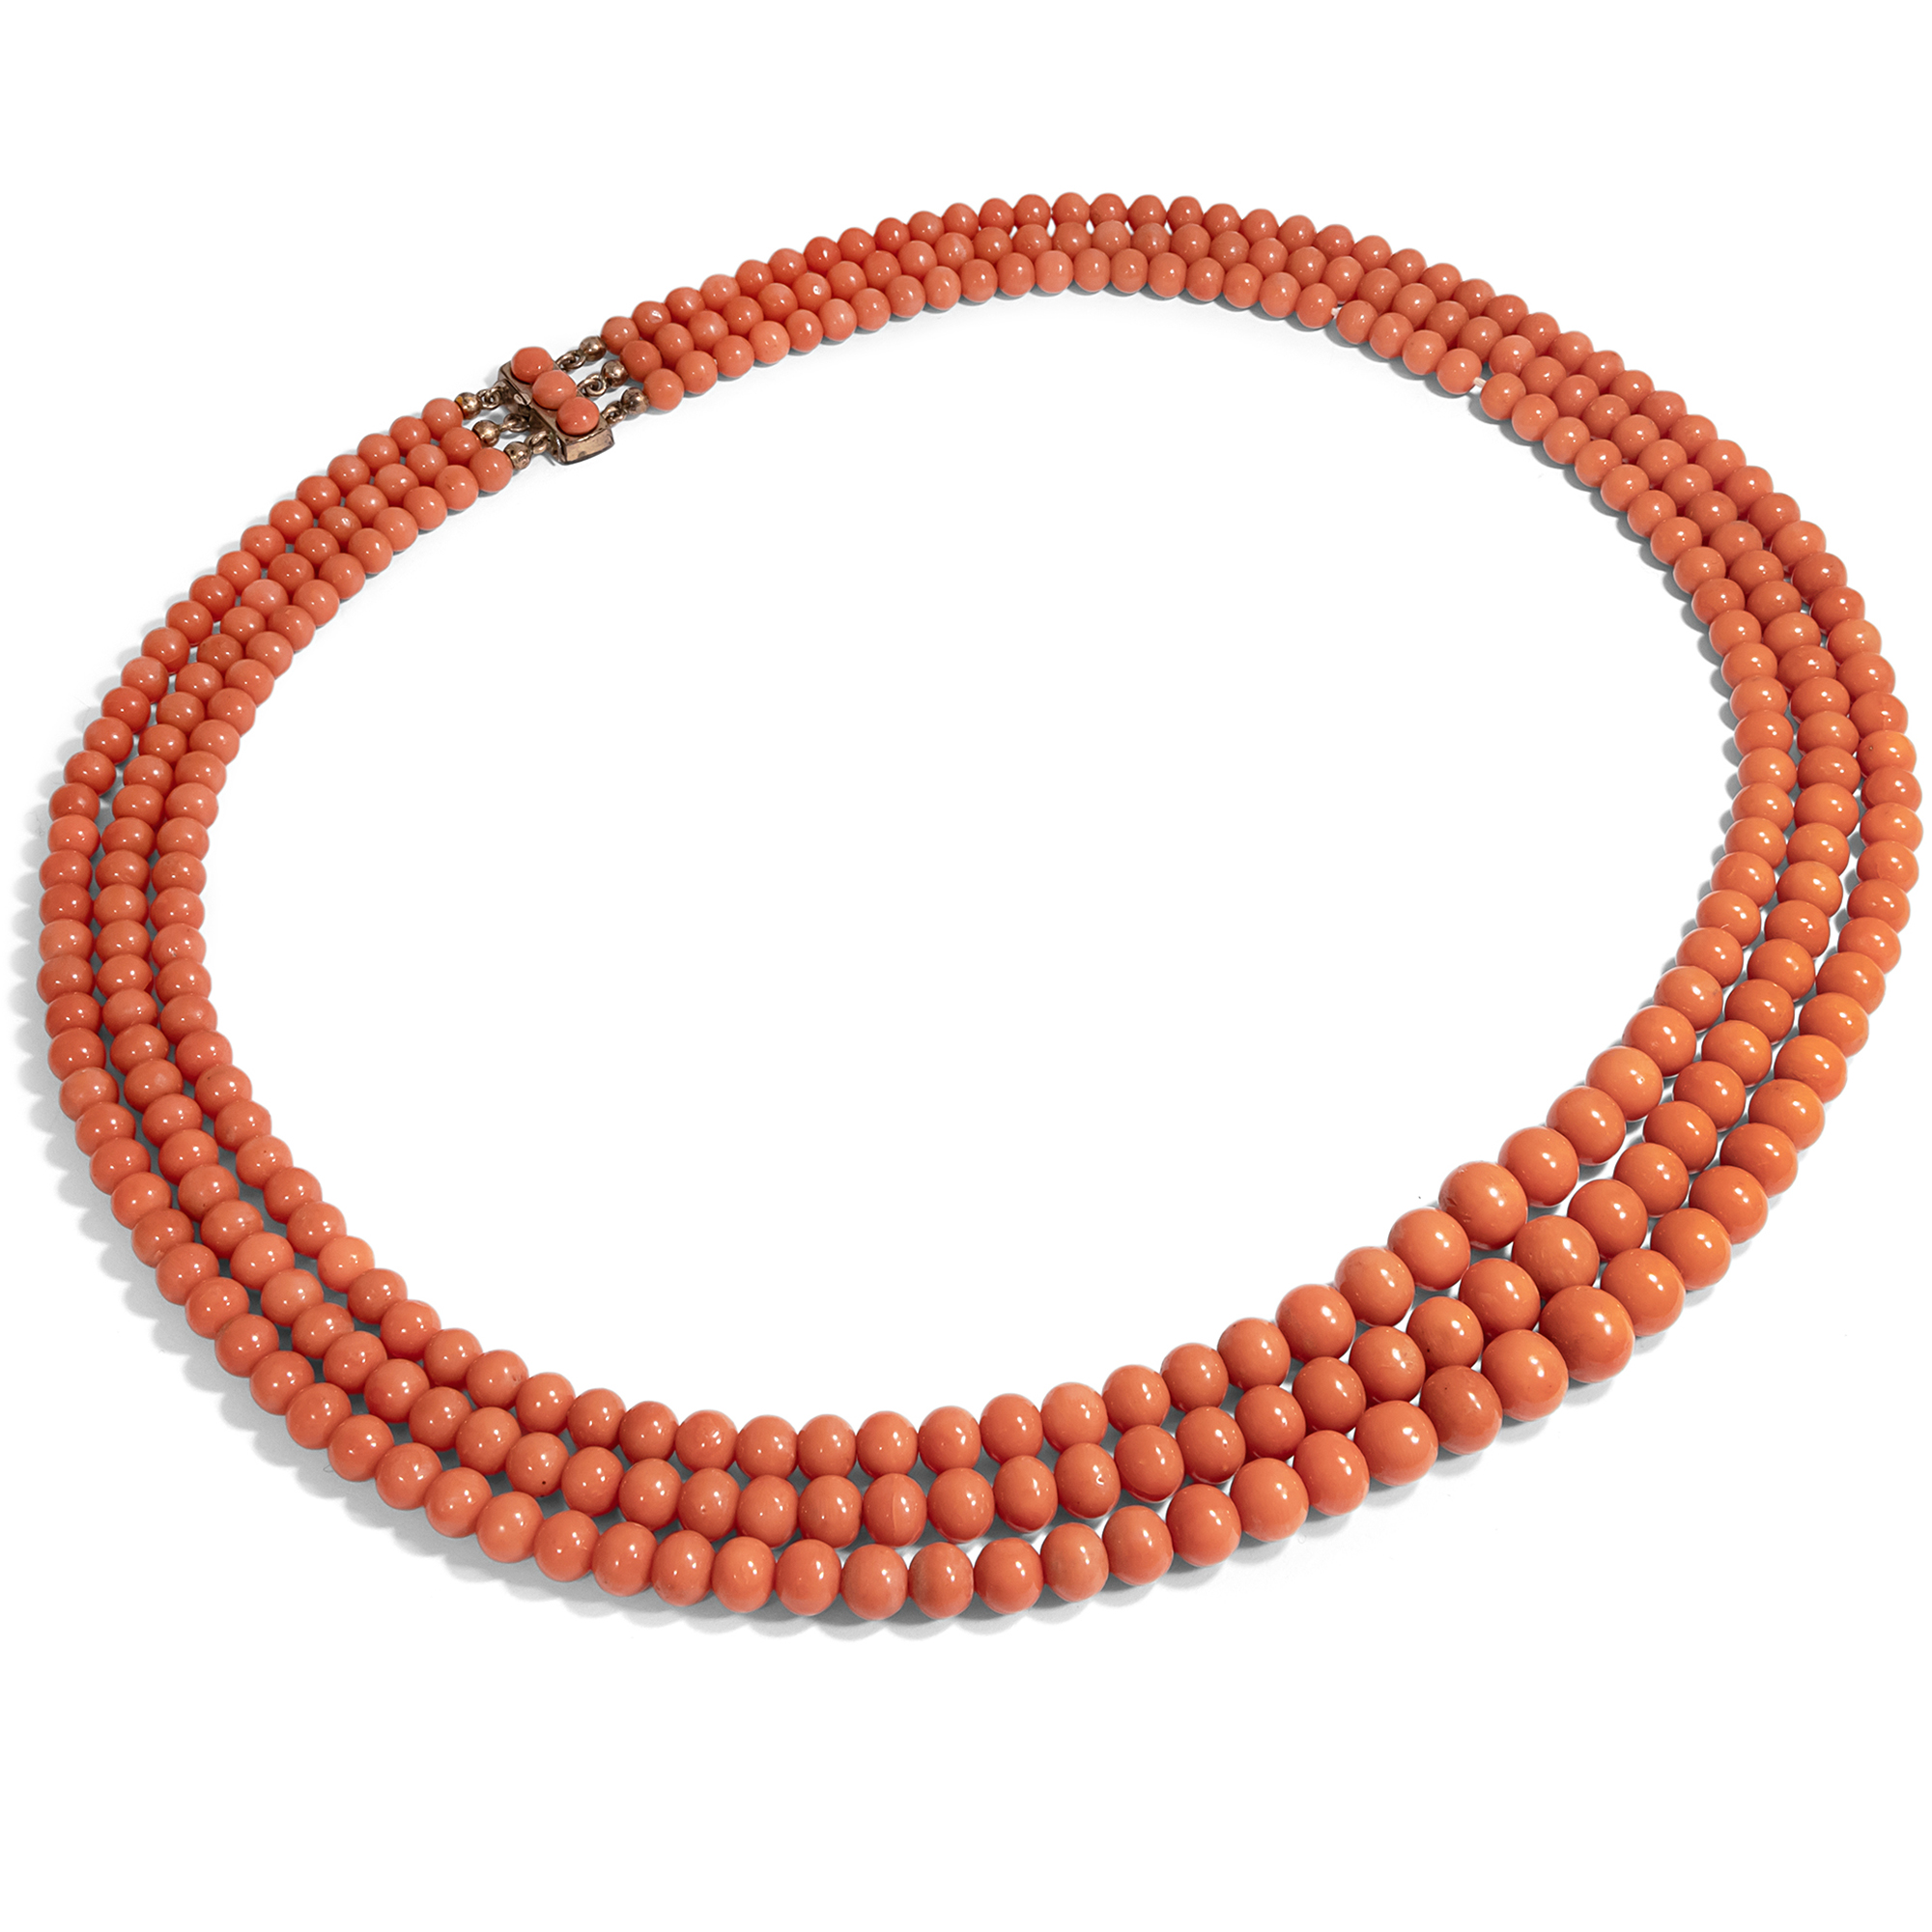 Magnificent Antique Coral Necklace in Three Rows, Italy ca. 1900